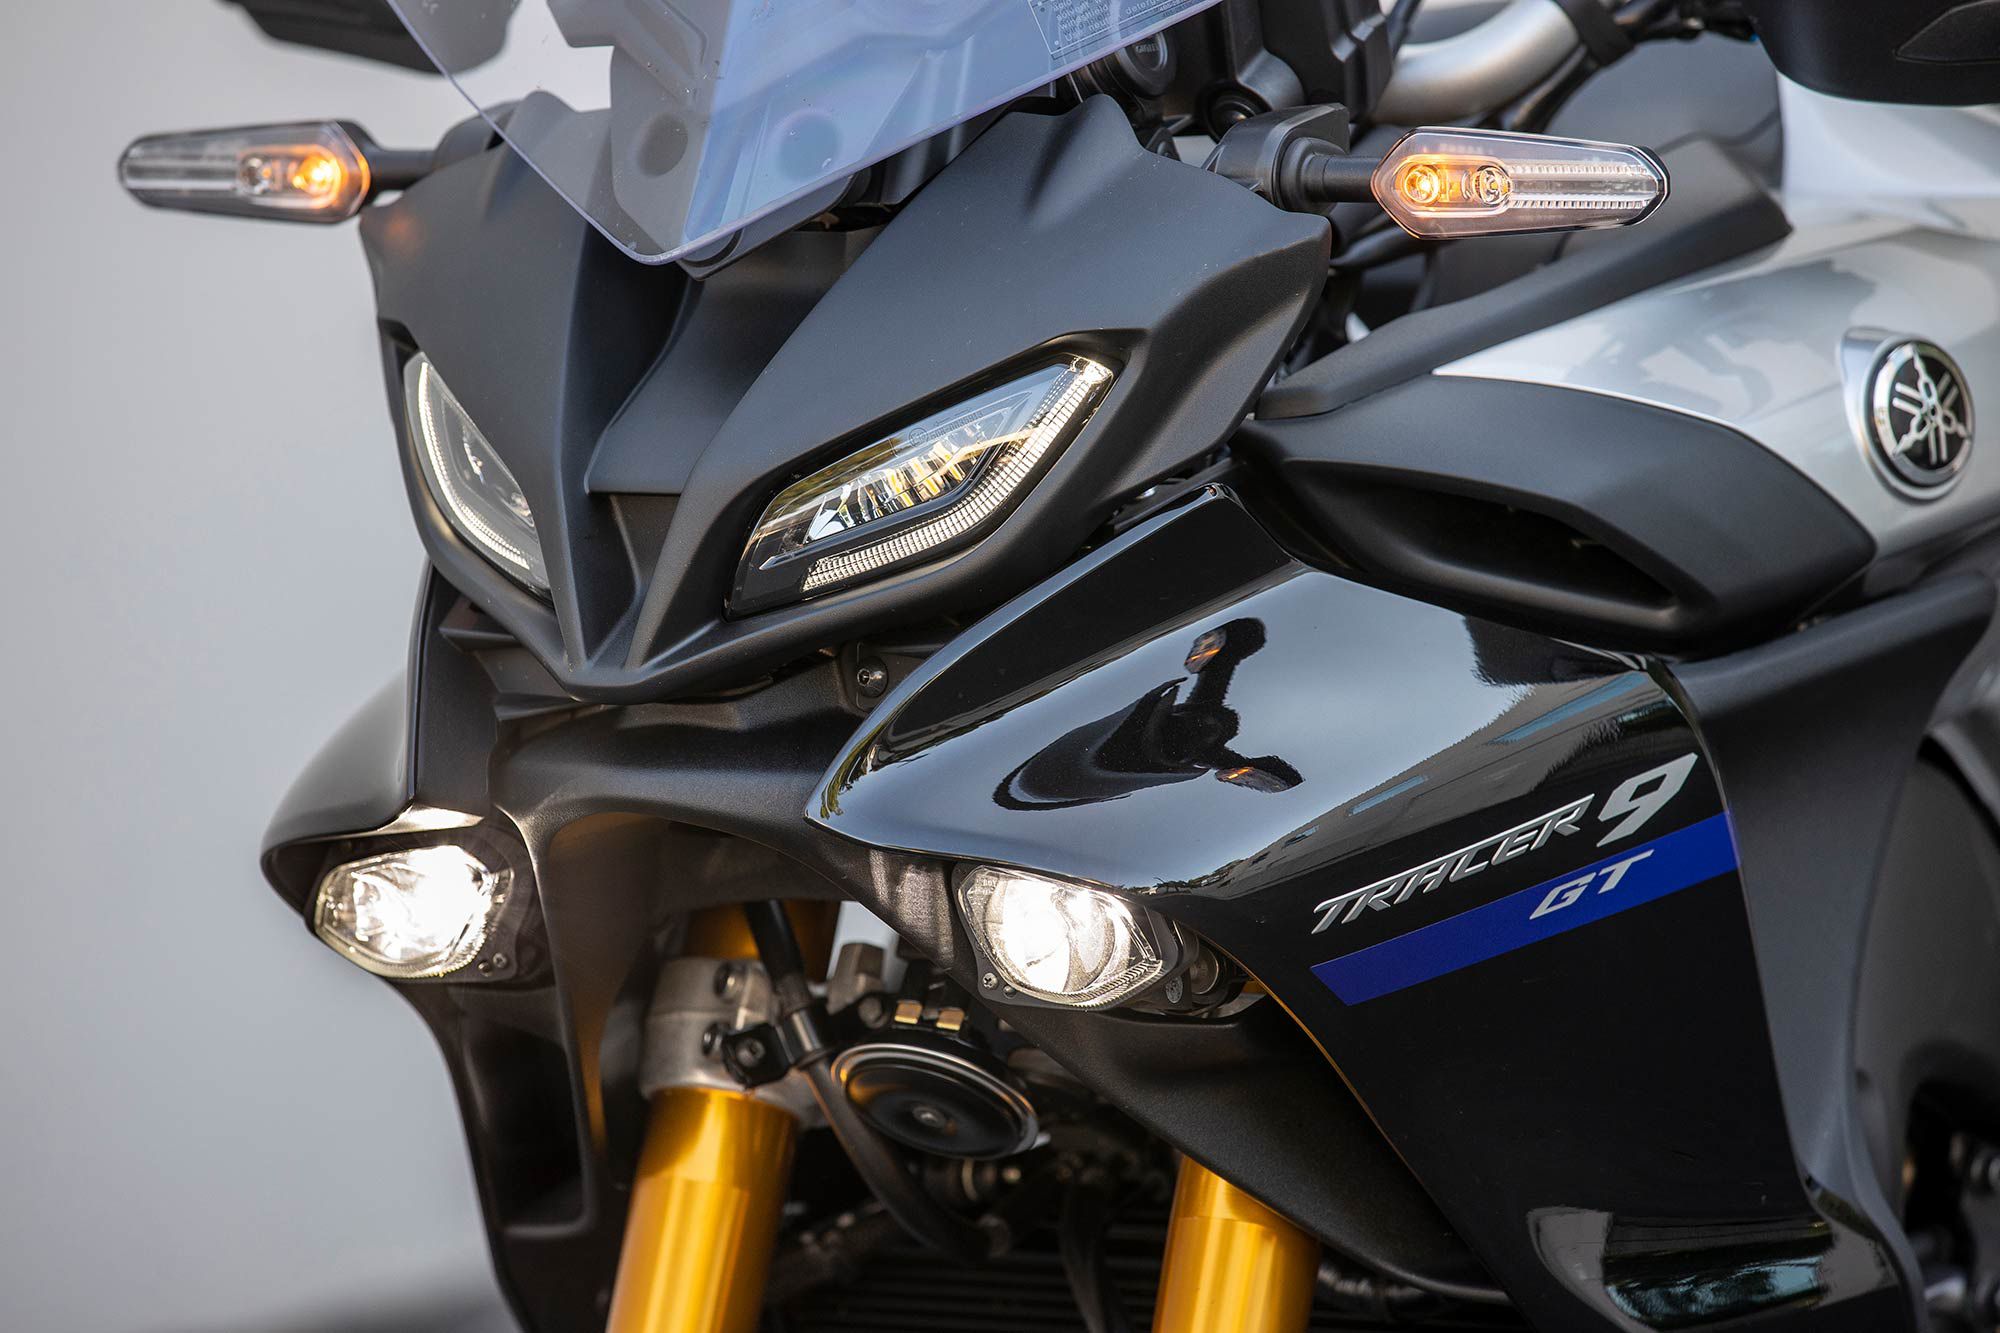 The Tracer 9 GT gets more aggressive styling for 2021, with hints of YZF-R1 influence.